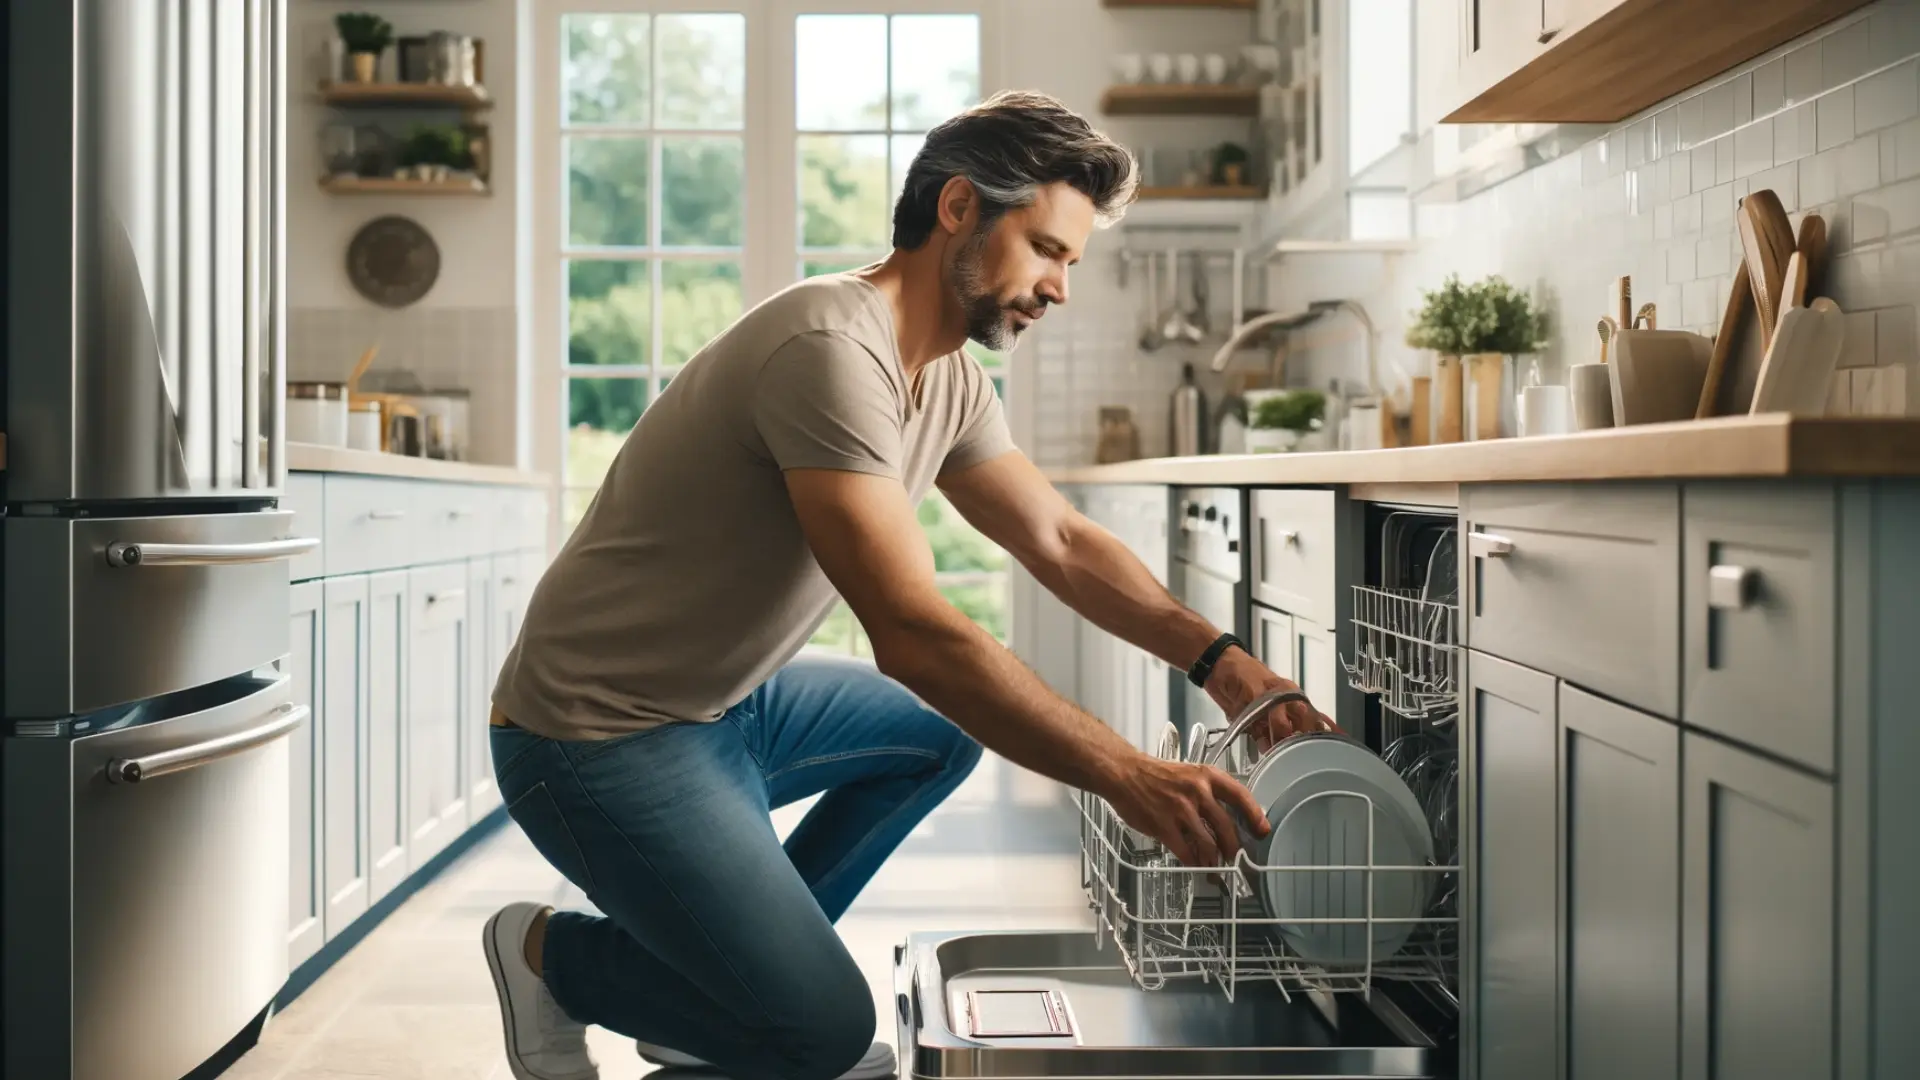 A middle-aged man ensures his dishwasher runs smoothly by loading it correctly, as part of regular appliance care to prevent drainage issues.